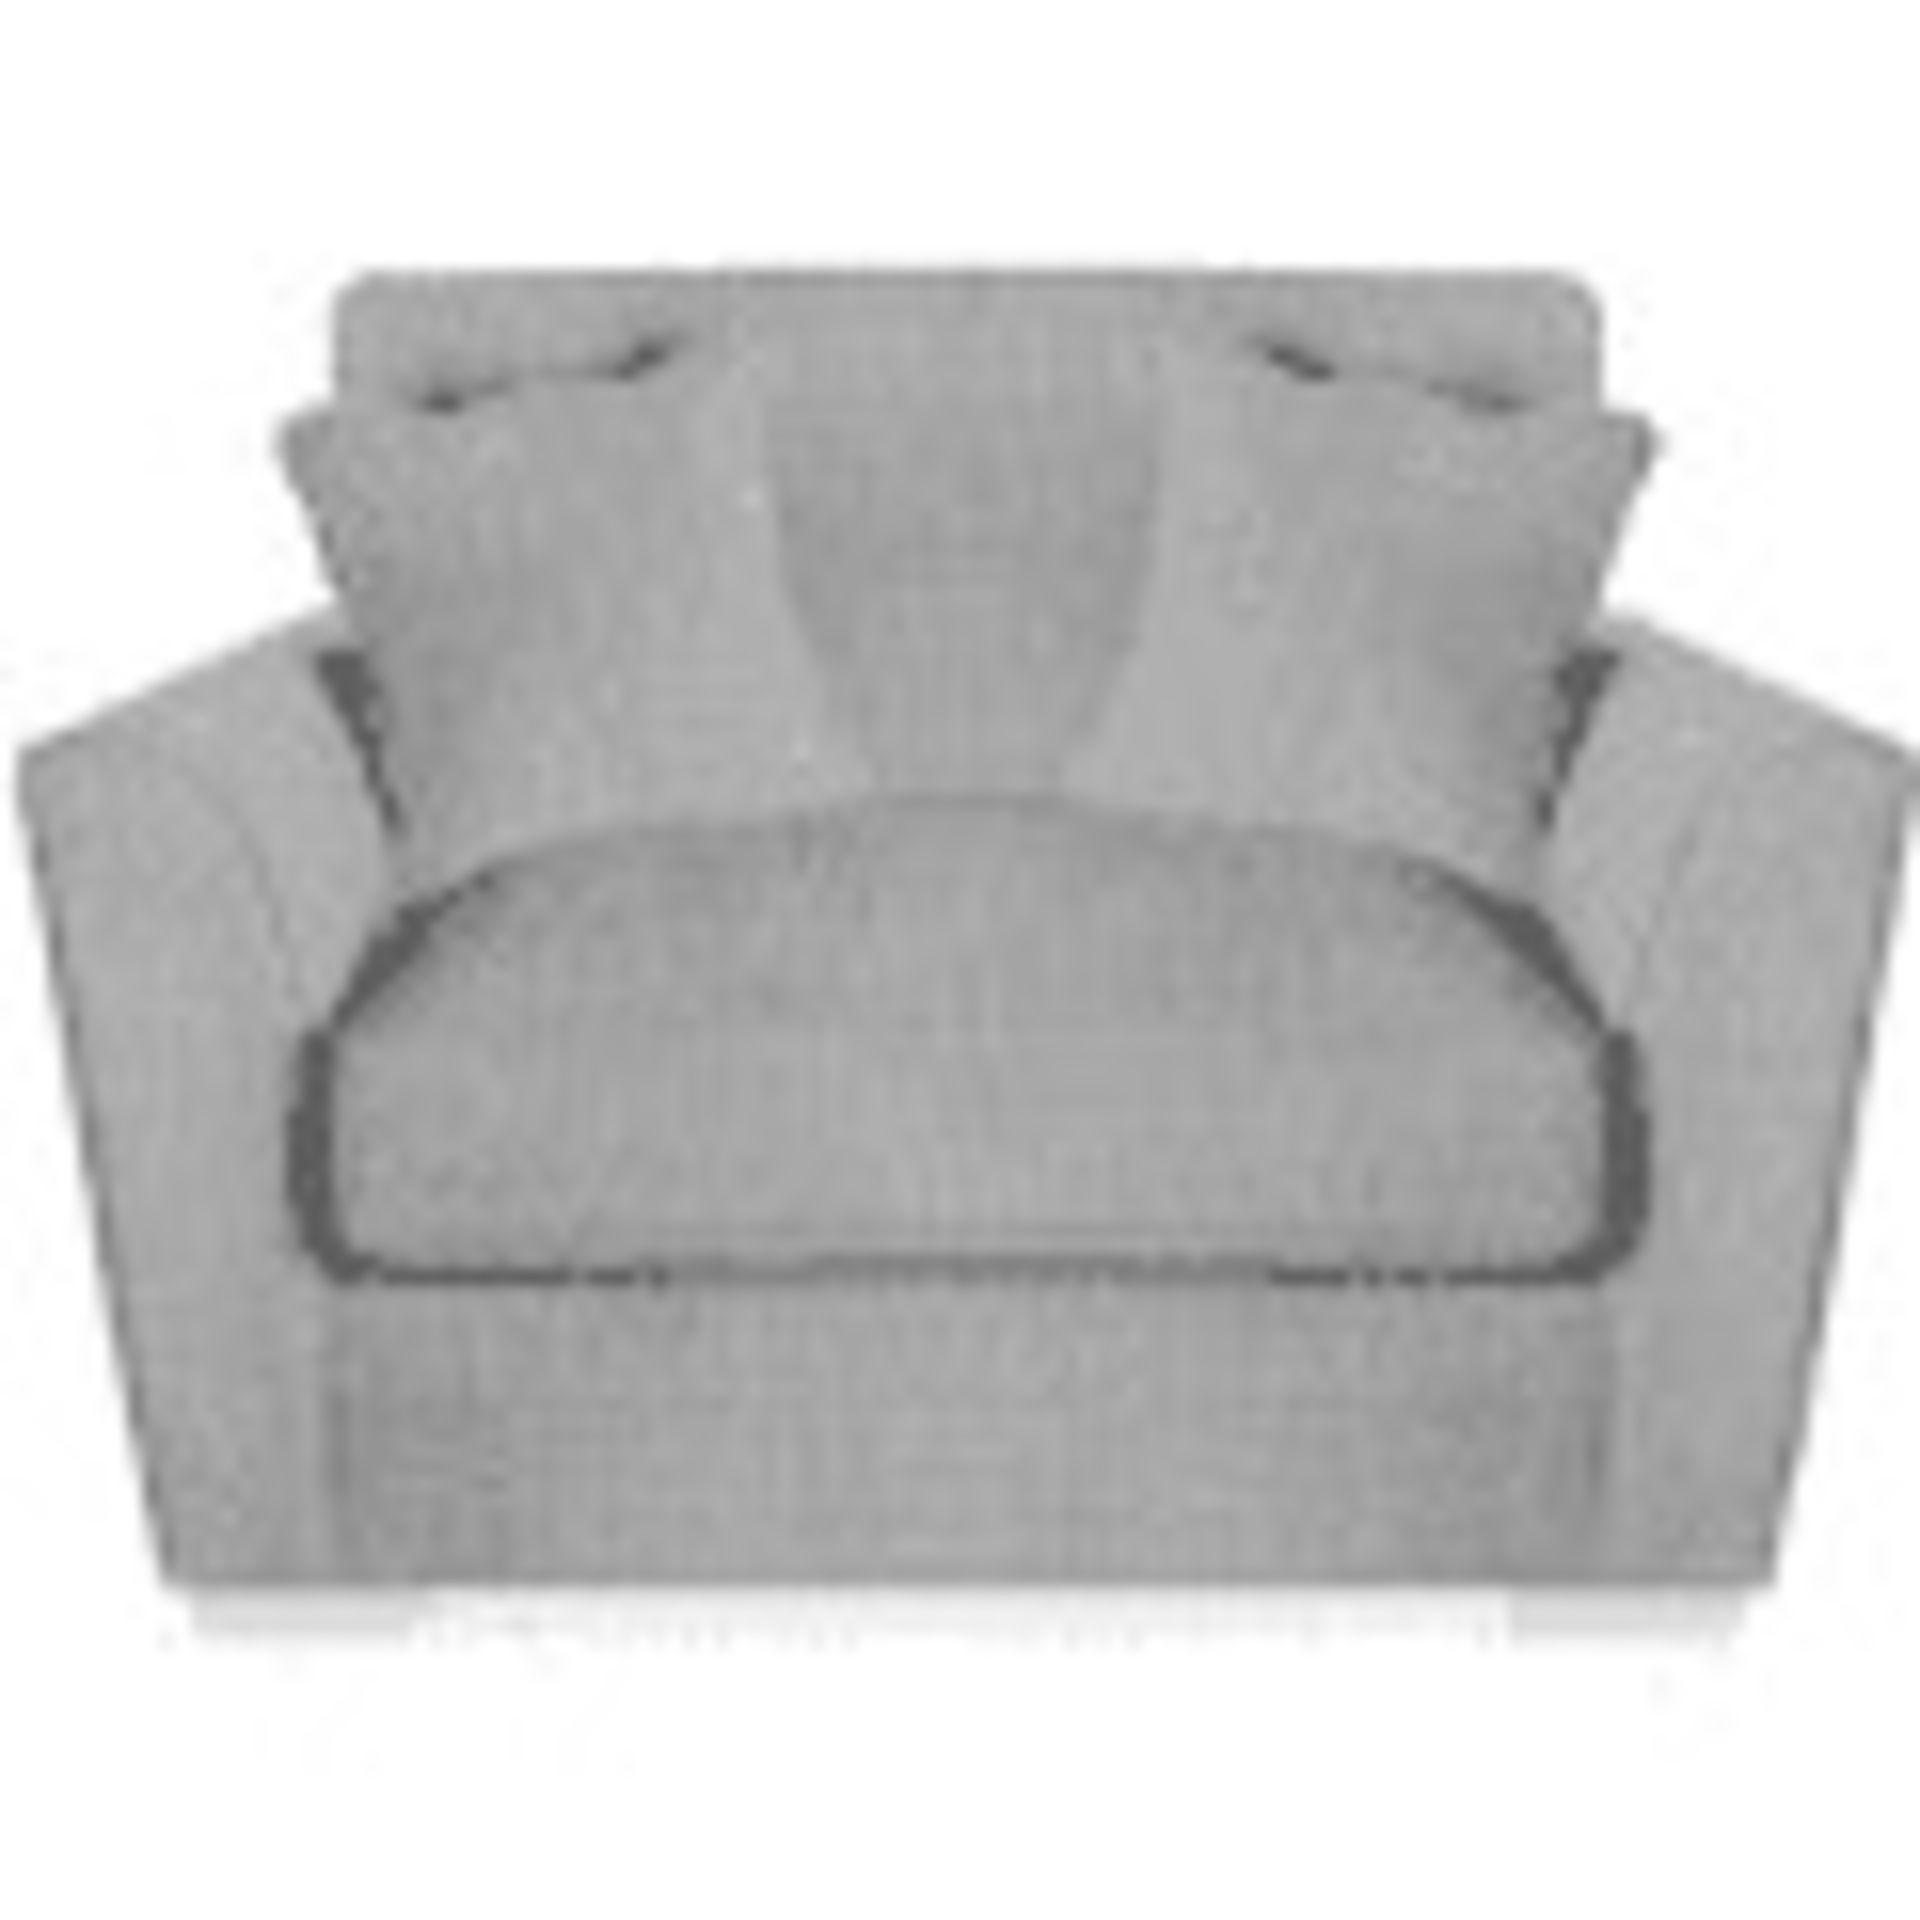 1 BRAND NEW BAGGED FABB SOFAS GROSVENOR SNUGGLE CHAIR IN CASEY CHARCOAL (VIEWING HIGHLY